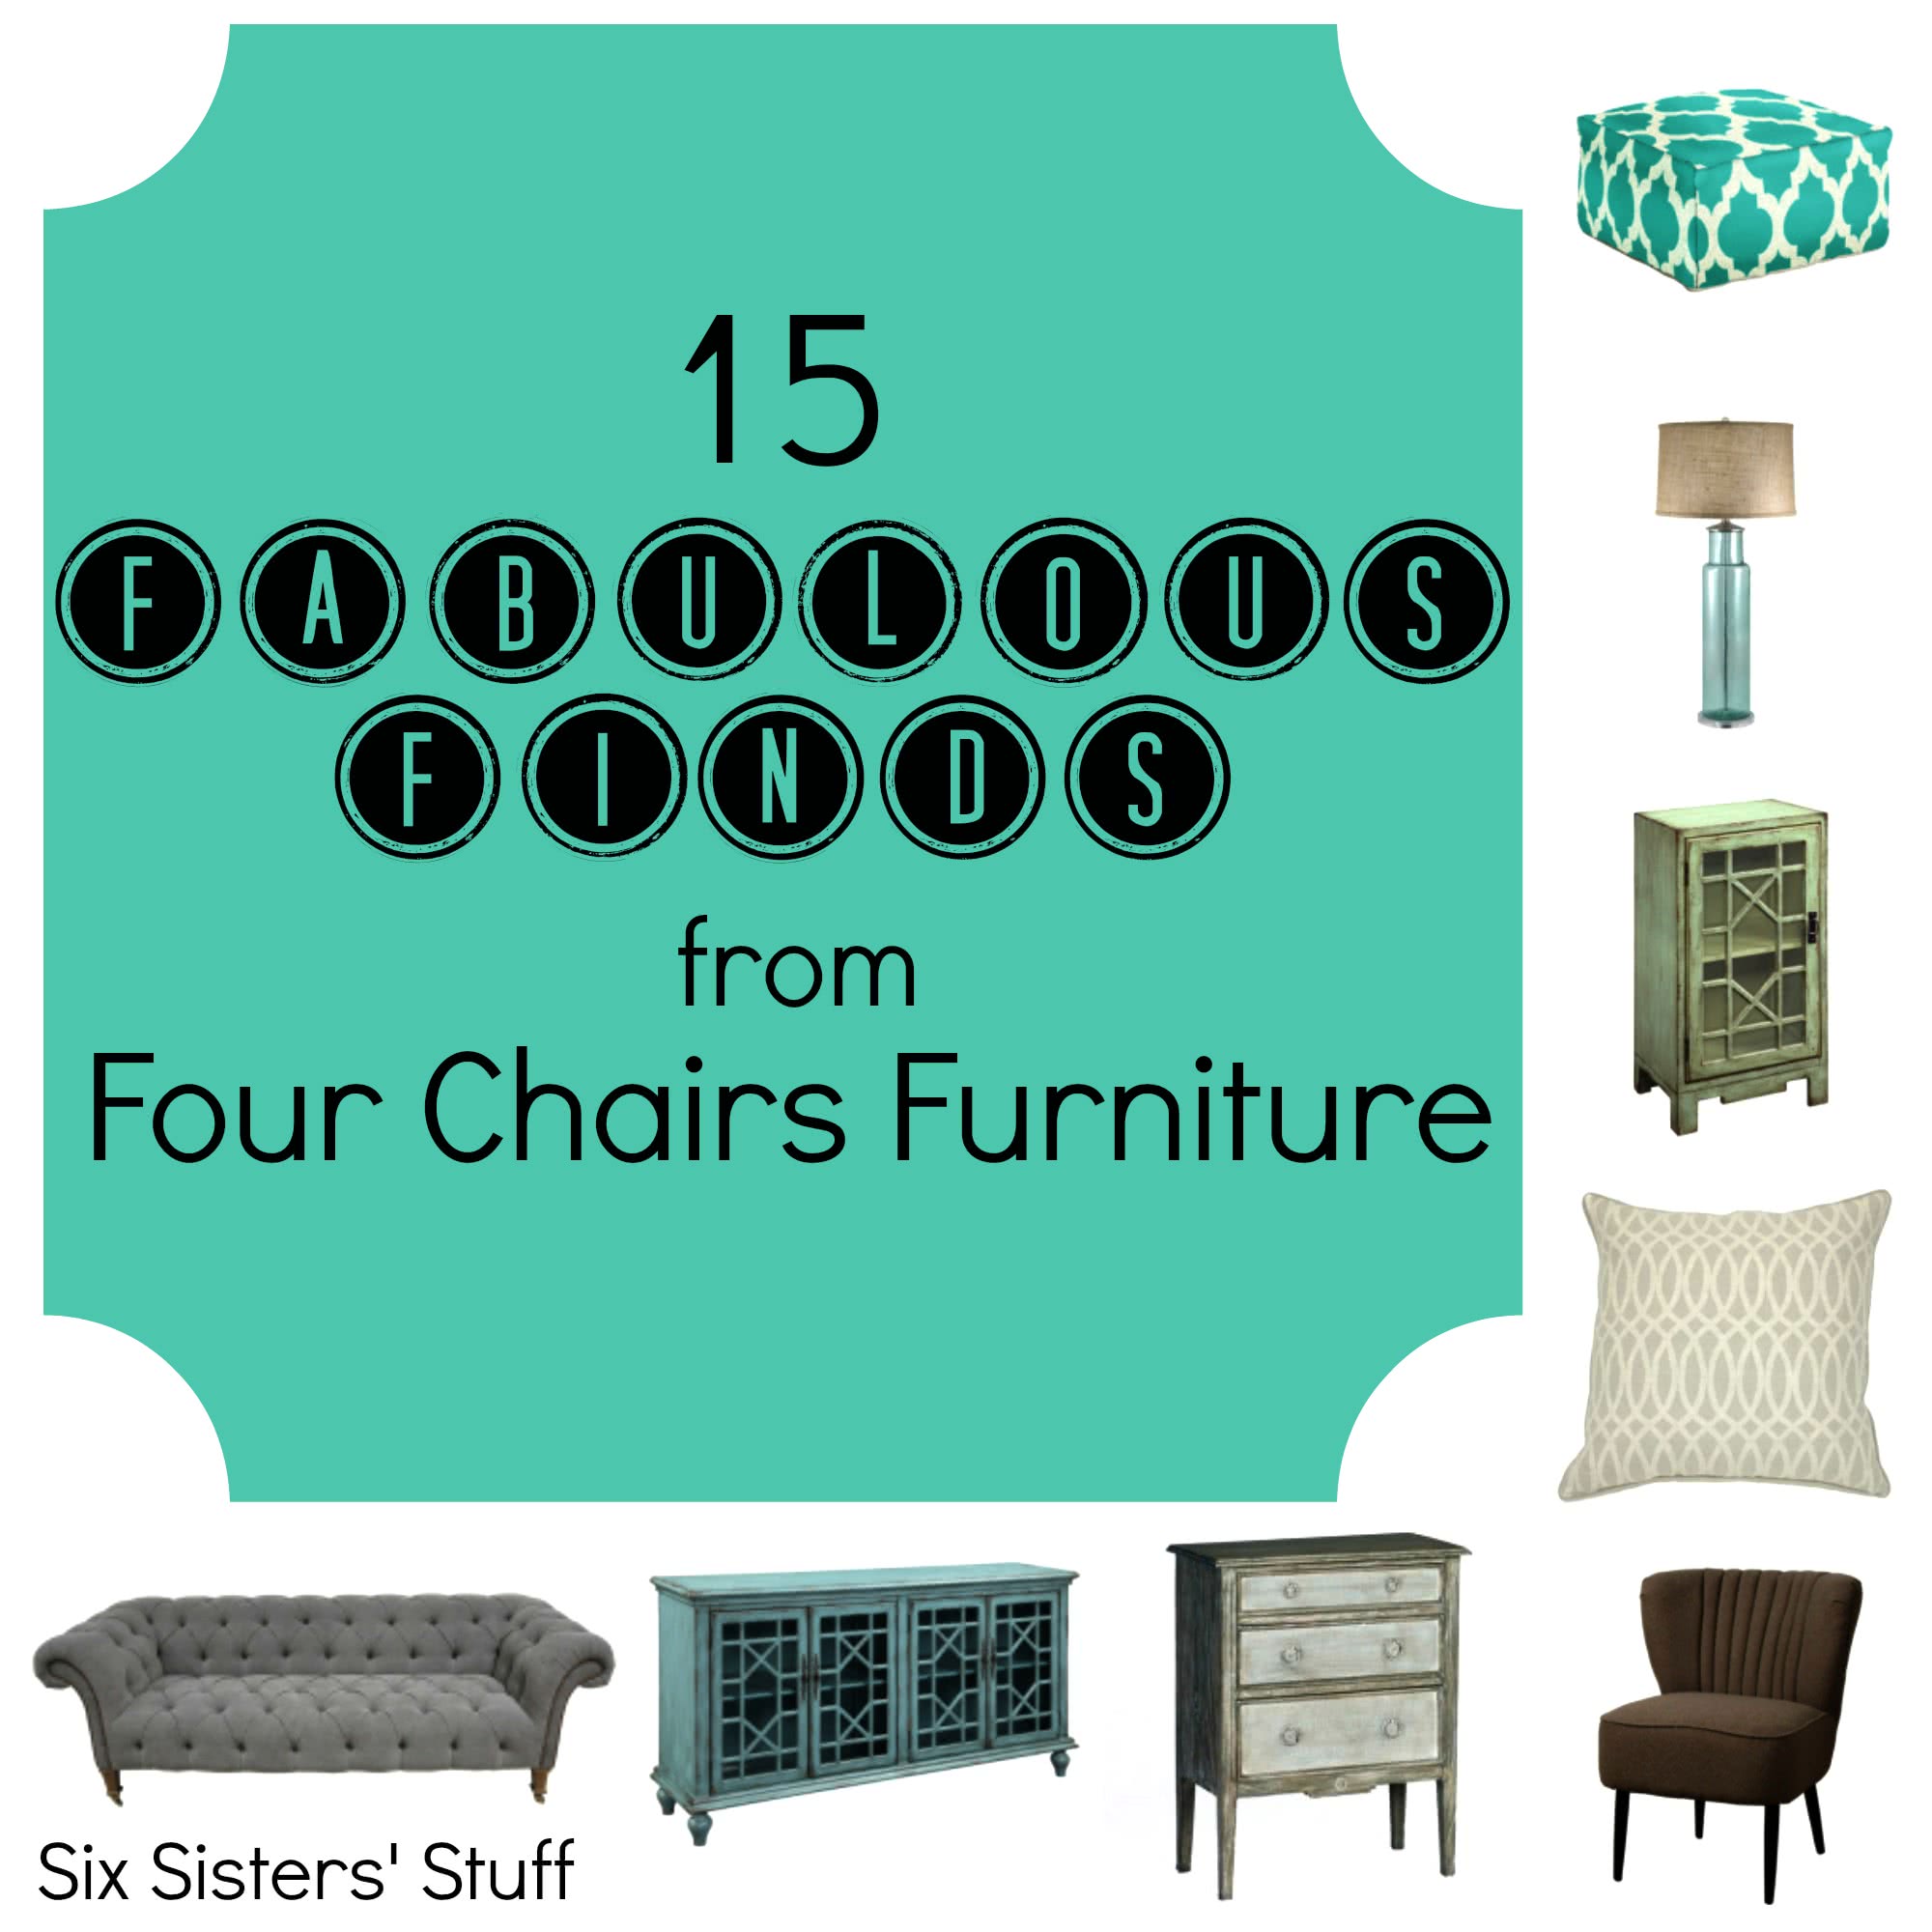 15 Fabulous Finds from Four Chairs Furniture